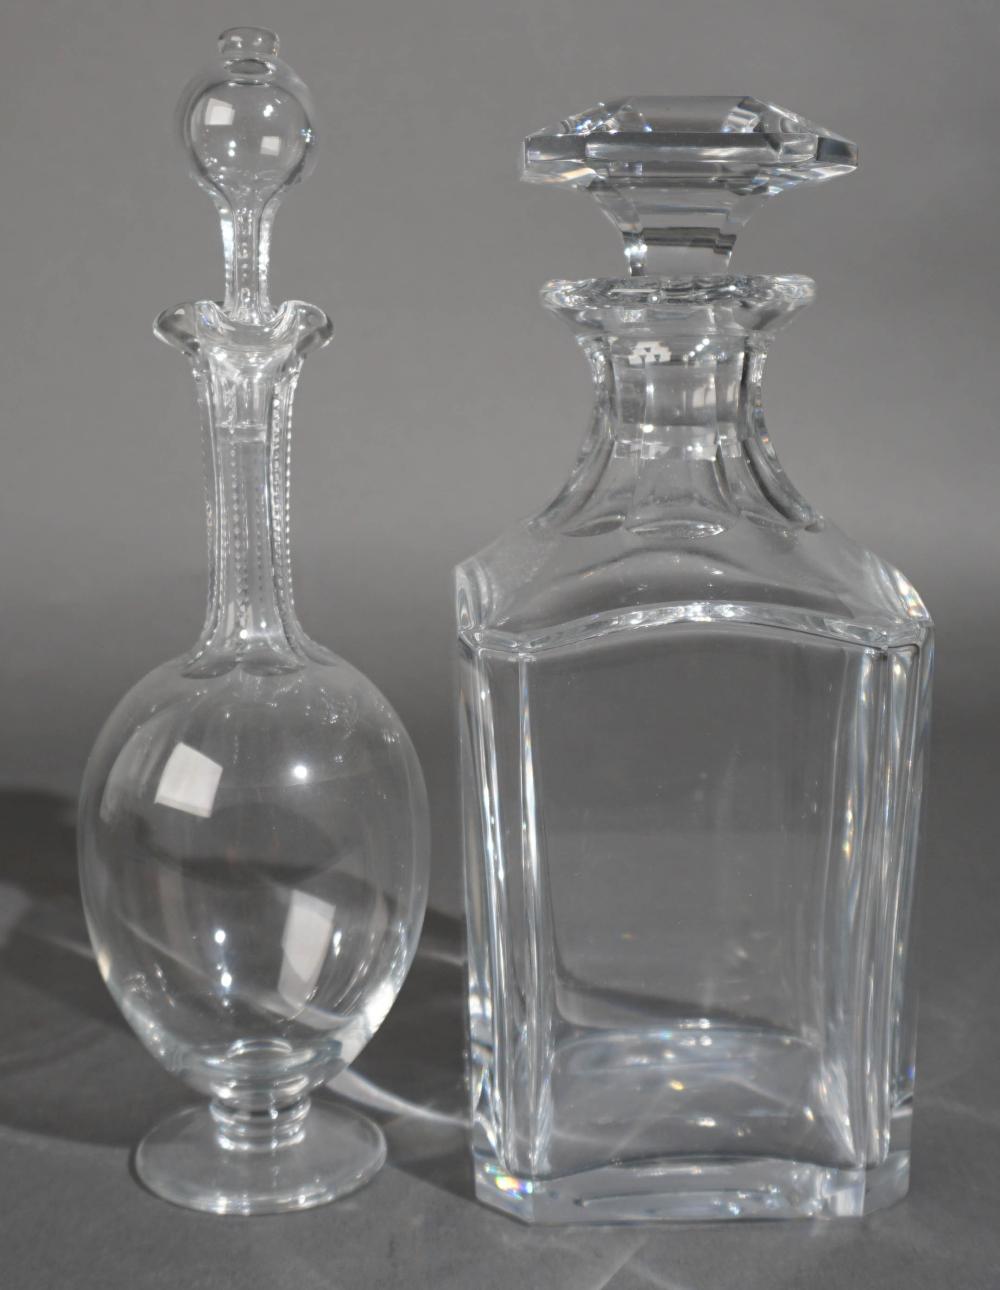 TWO BACCARAT CRYSTAL DECANTERS 2e7734